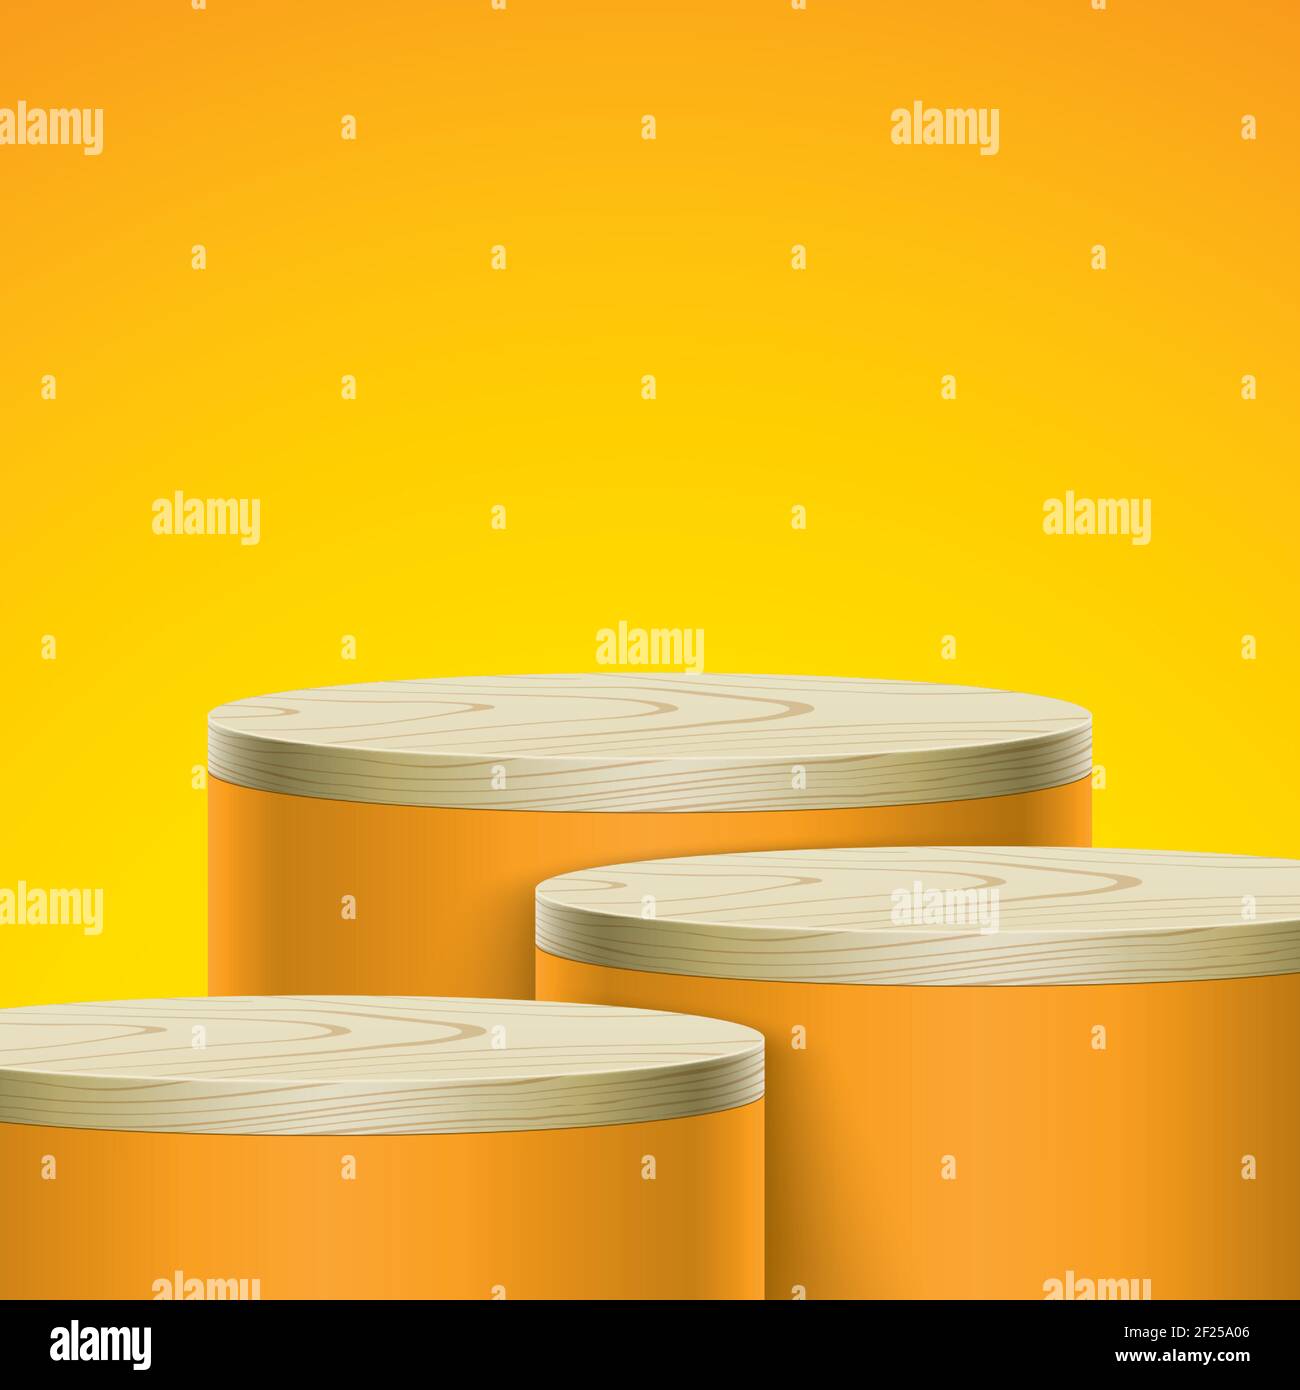 Abstract vector scene with orange color display stands, on a gradient orange background. Group of 3 cylinder shape columns with wooden cover, with free space for an object, product, or text placement. Stock Vector